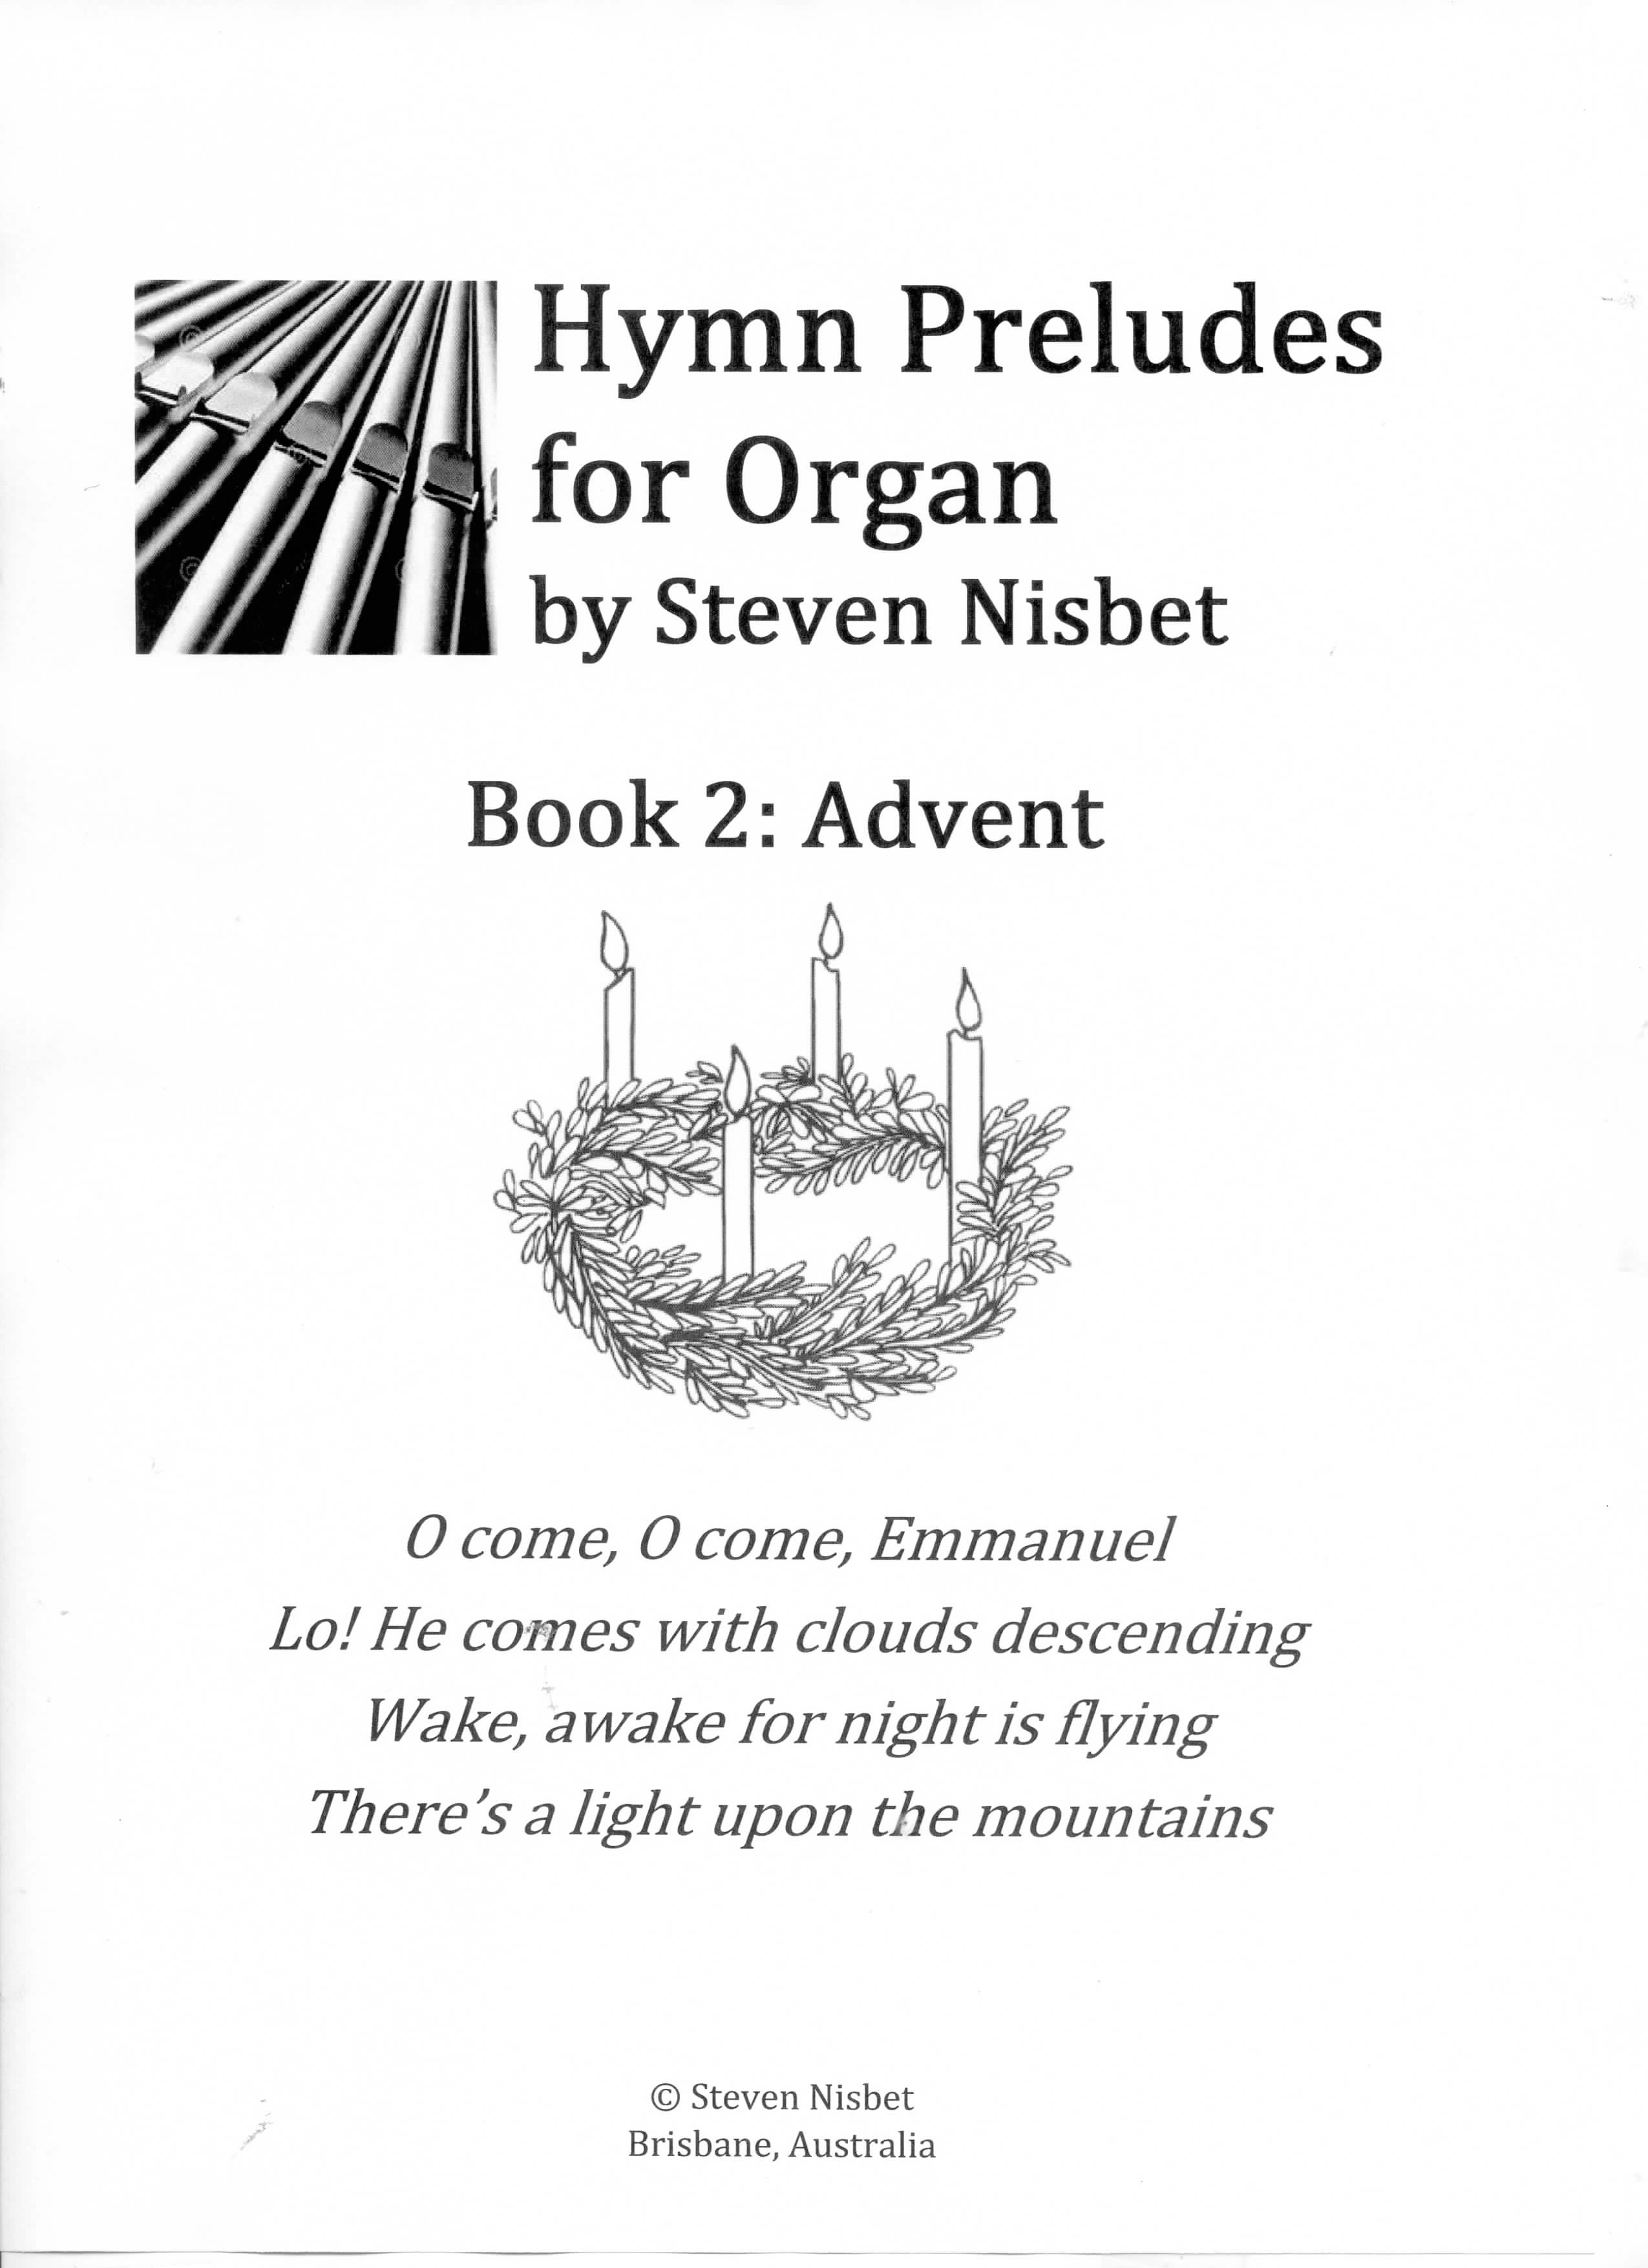 Hymn Preludes for Organ Advent by Steven Nisbet